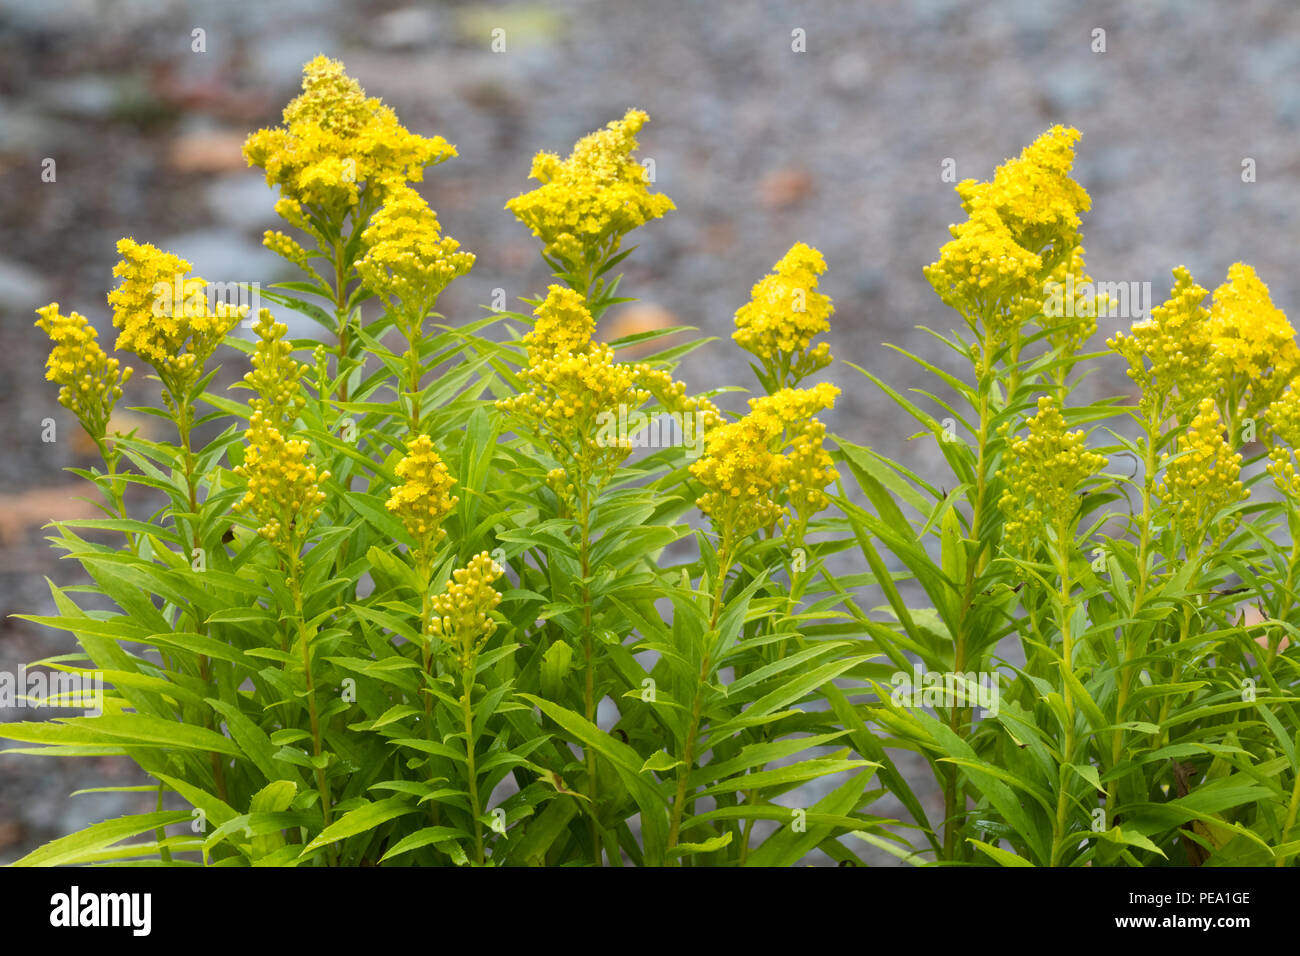 Yellow flowers in conical heads of the late summer blooming dwarf goldenrod, Solidago 'Little Lemon' Stock Photo